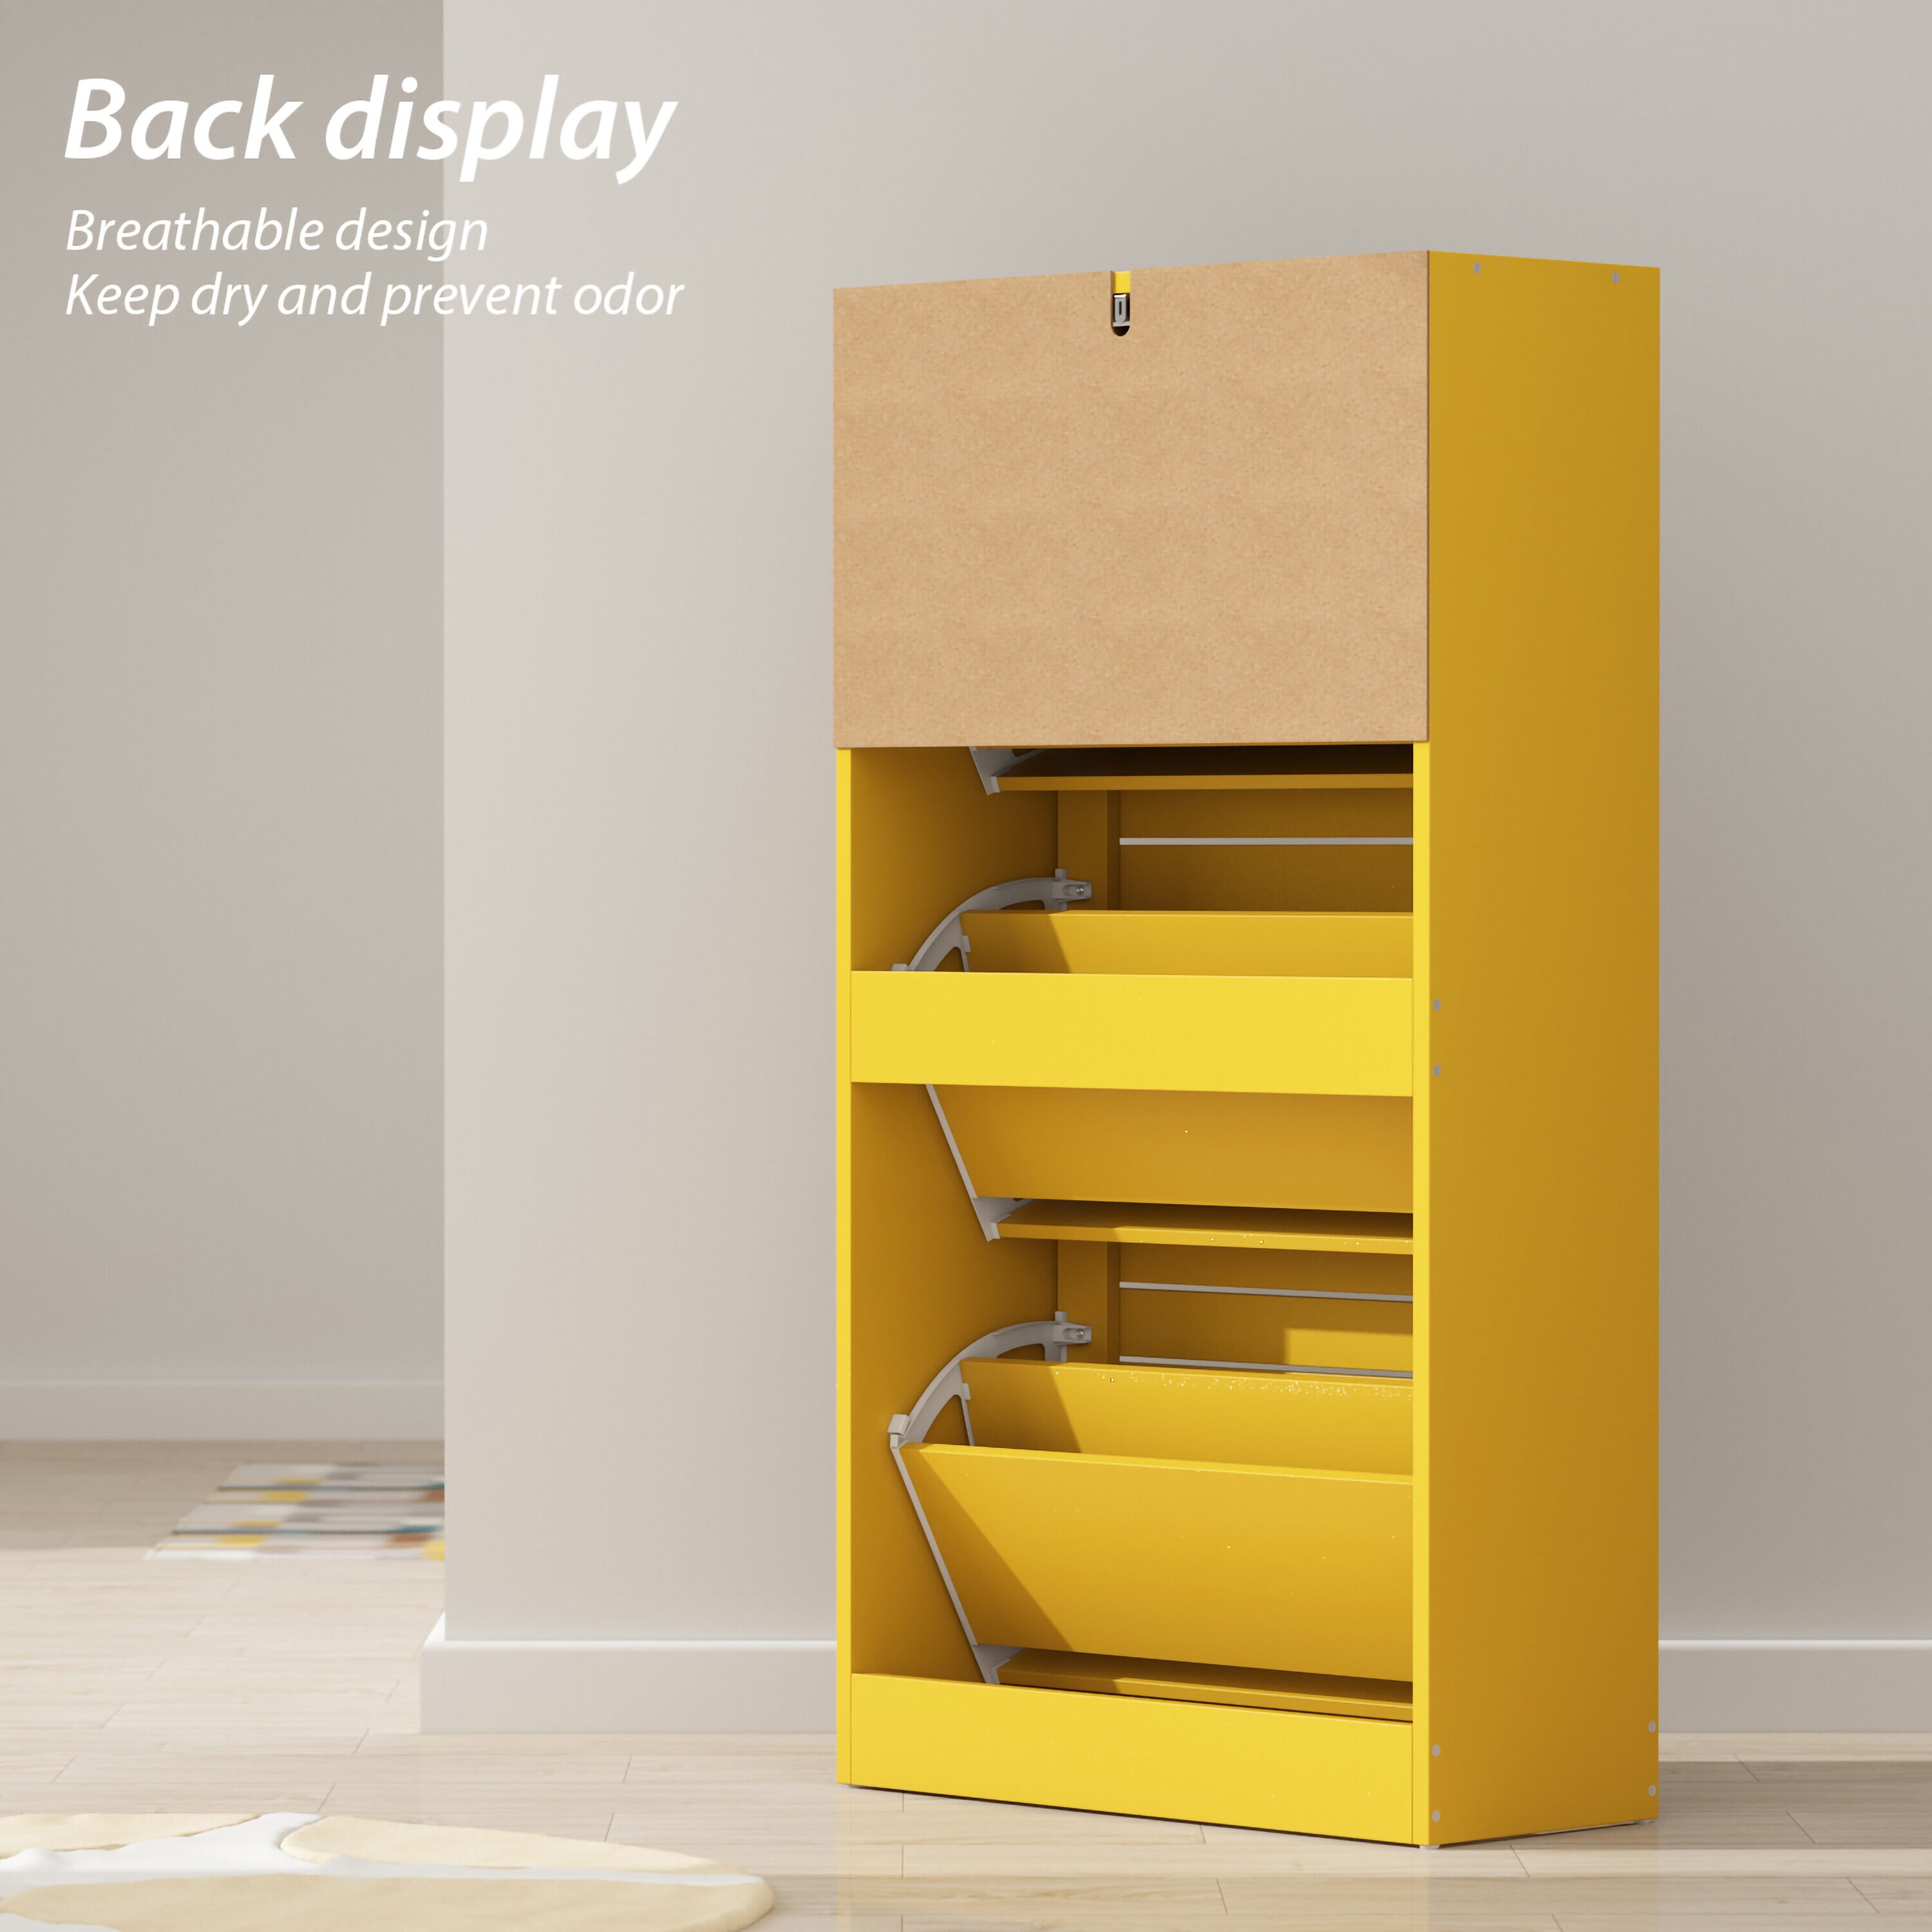 H Pair Yellow 42.3-in Shoe 10 at in FUFU&GAGA the Shoe Tier Composite 3 department Storage Cabinet